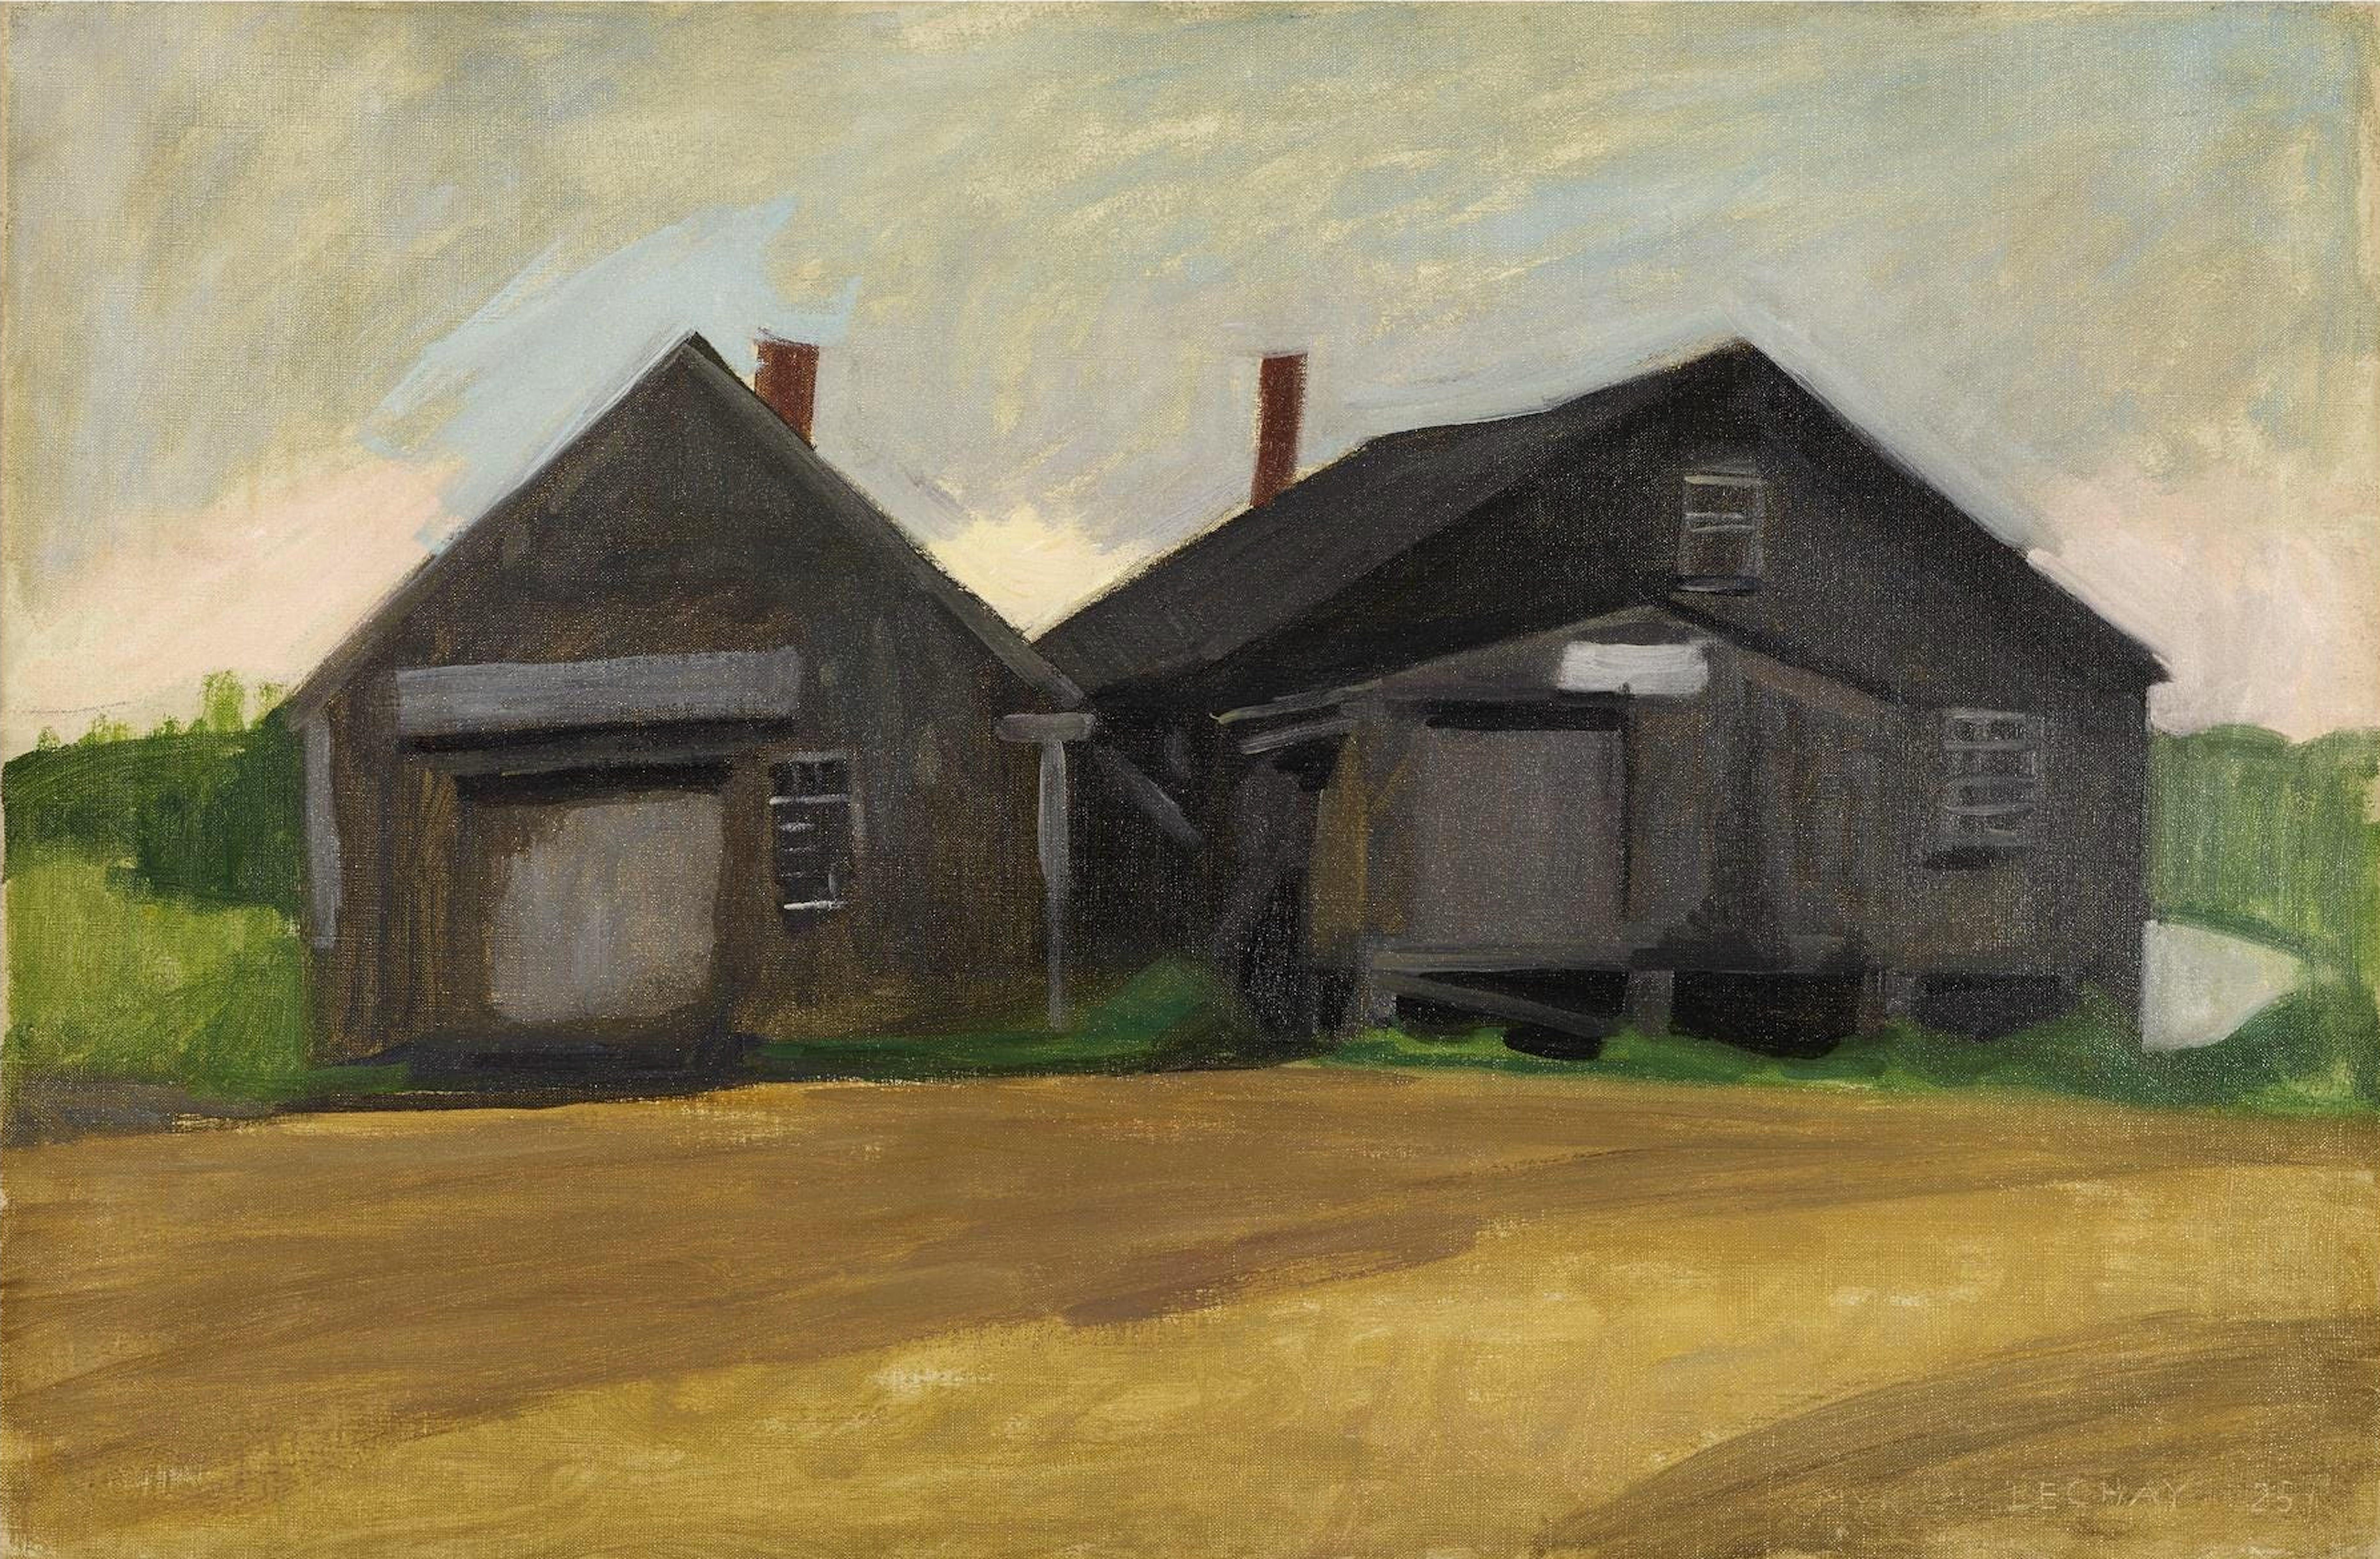 Oil on canvas, signed and dated to lower right 'Myron Lechay 25'. 
Signed and titled verso 'Old Blacksmith Shop Myron Lechay'. The old blacksmith shop in Kennebunkport Maine.
Measures: 20: